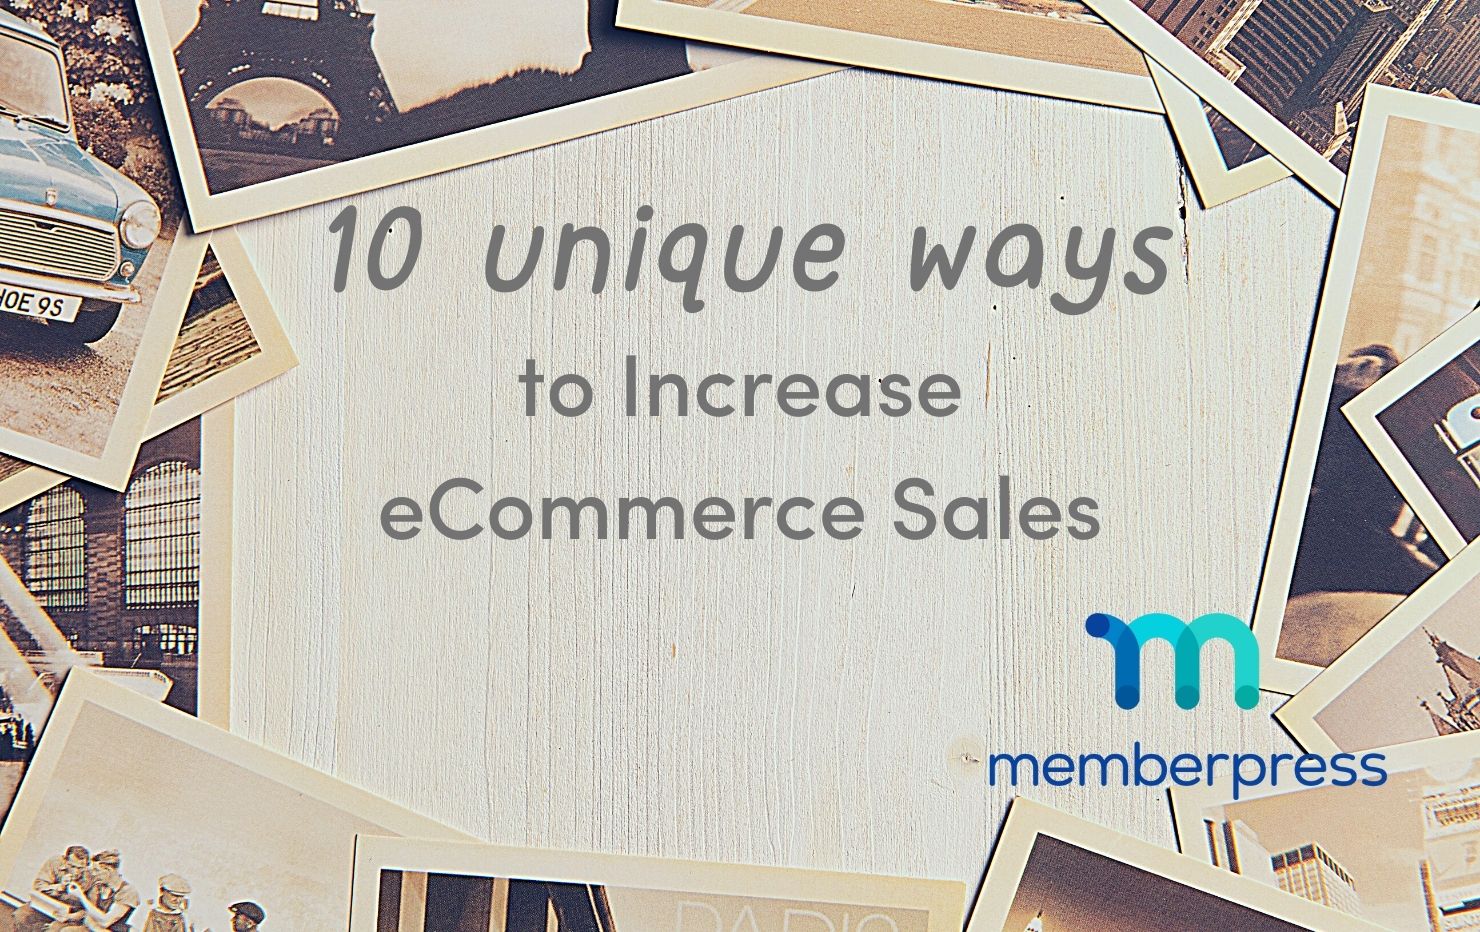 A collection of photographs ring around the words "10 unique ways to increase ecommerce sales". The MemberPress Blogs logo is present.